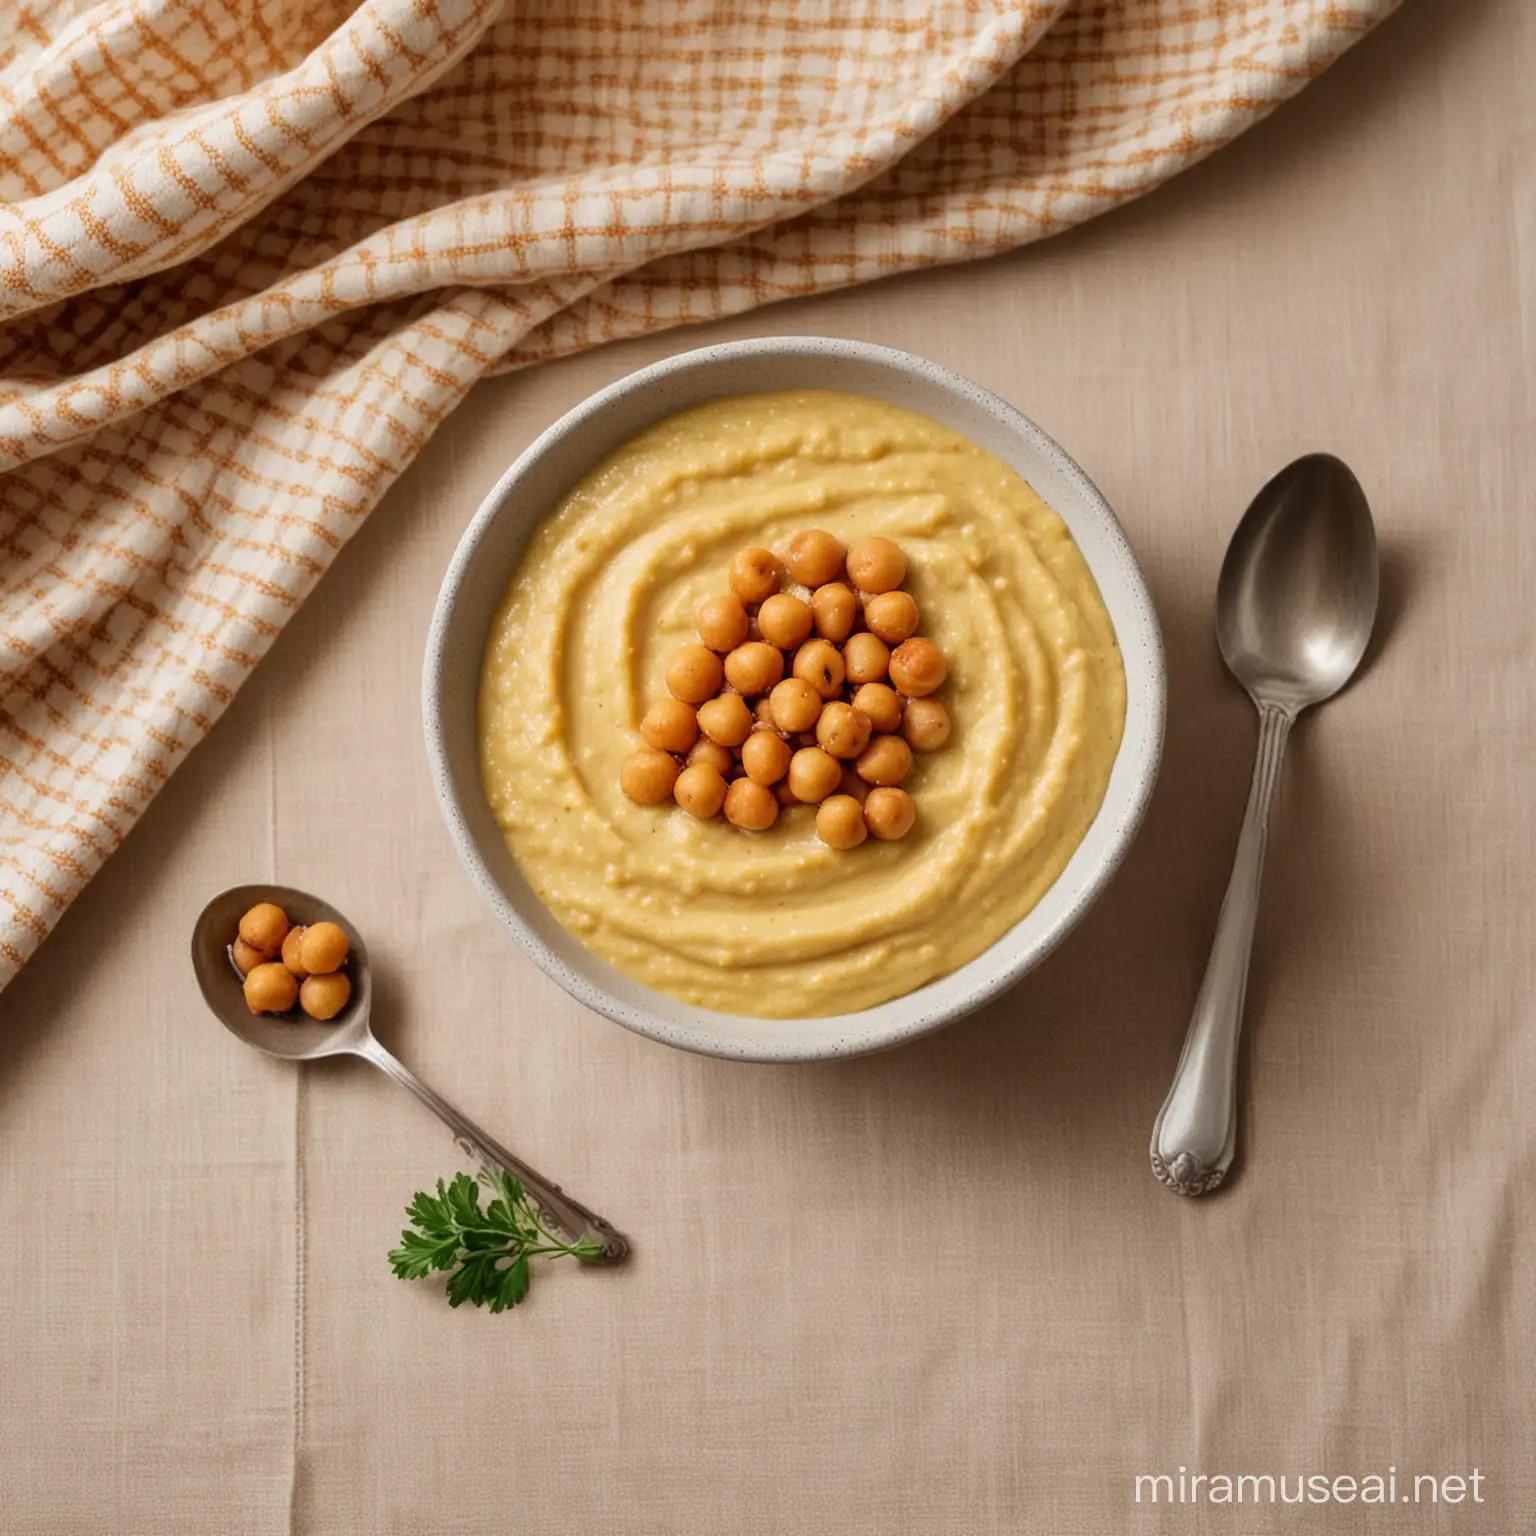 Simple Chickpea Puree in a bowl on a table with a nice tablecloth